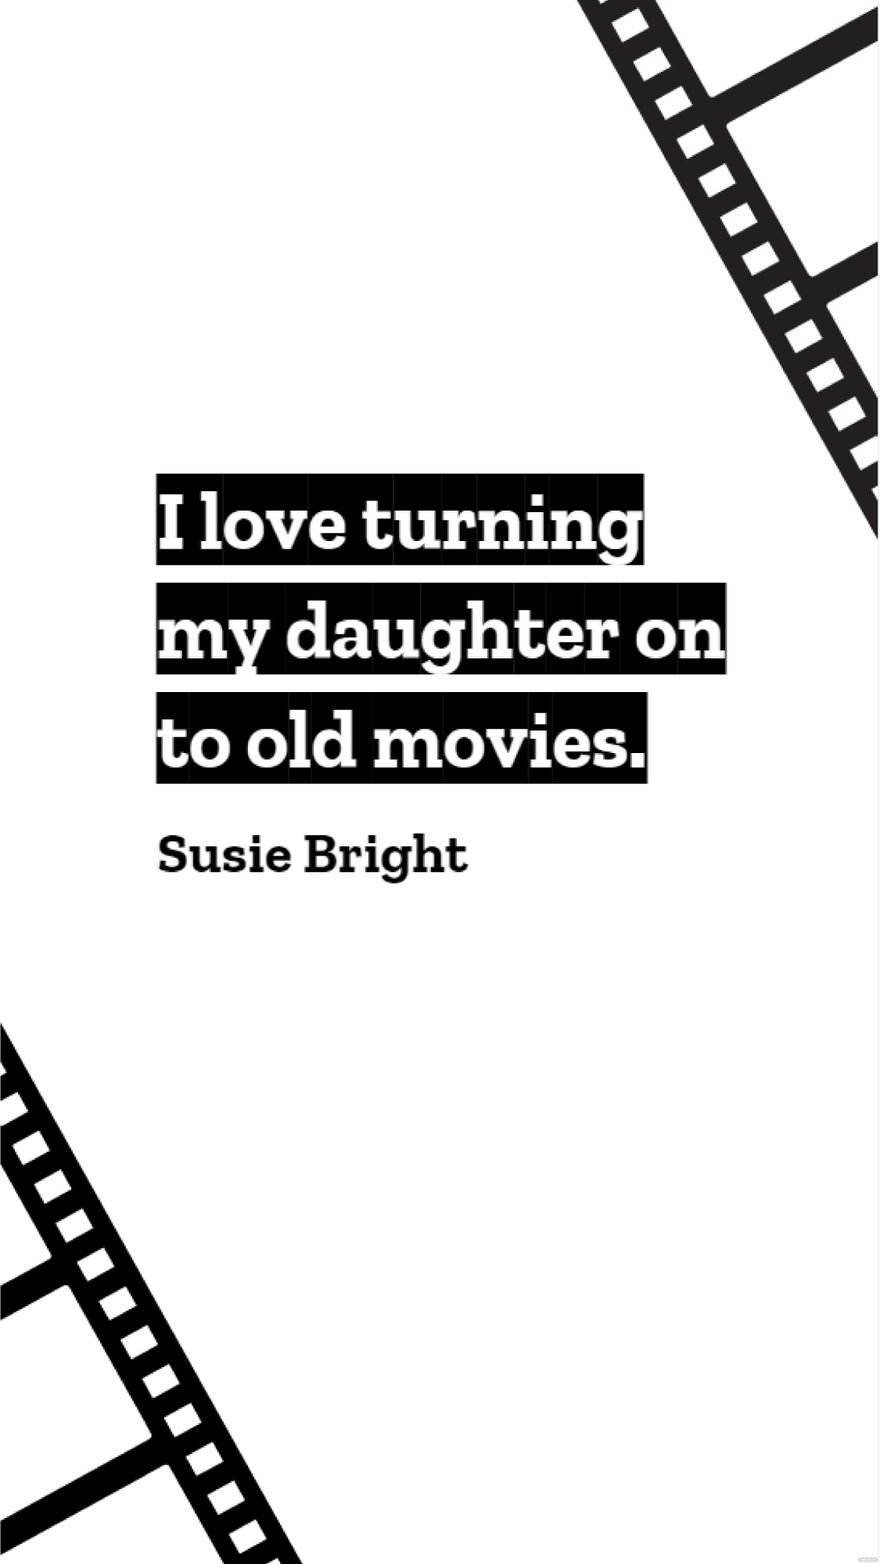 Susie Bright - I love turning my daughter on to old movies. in JPG